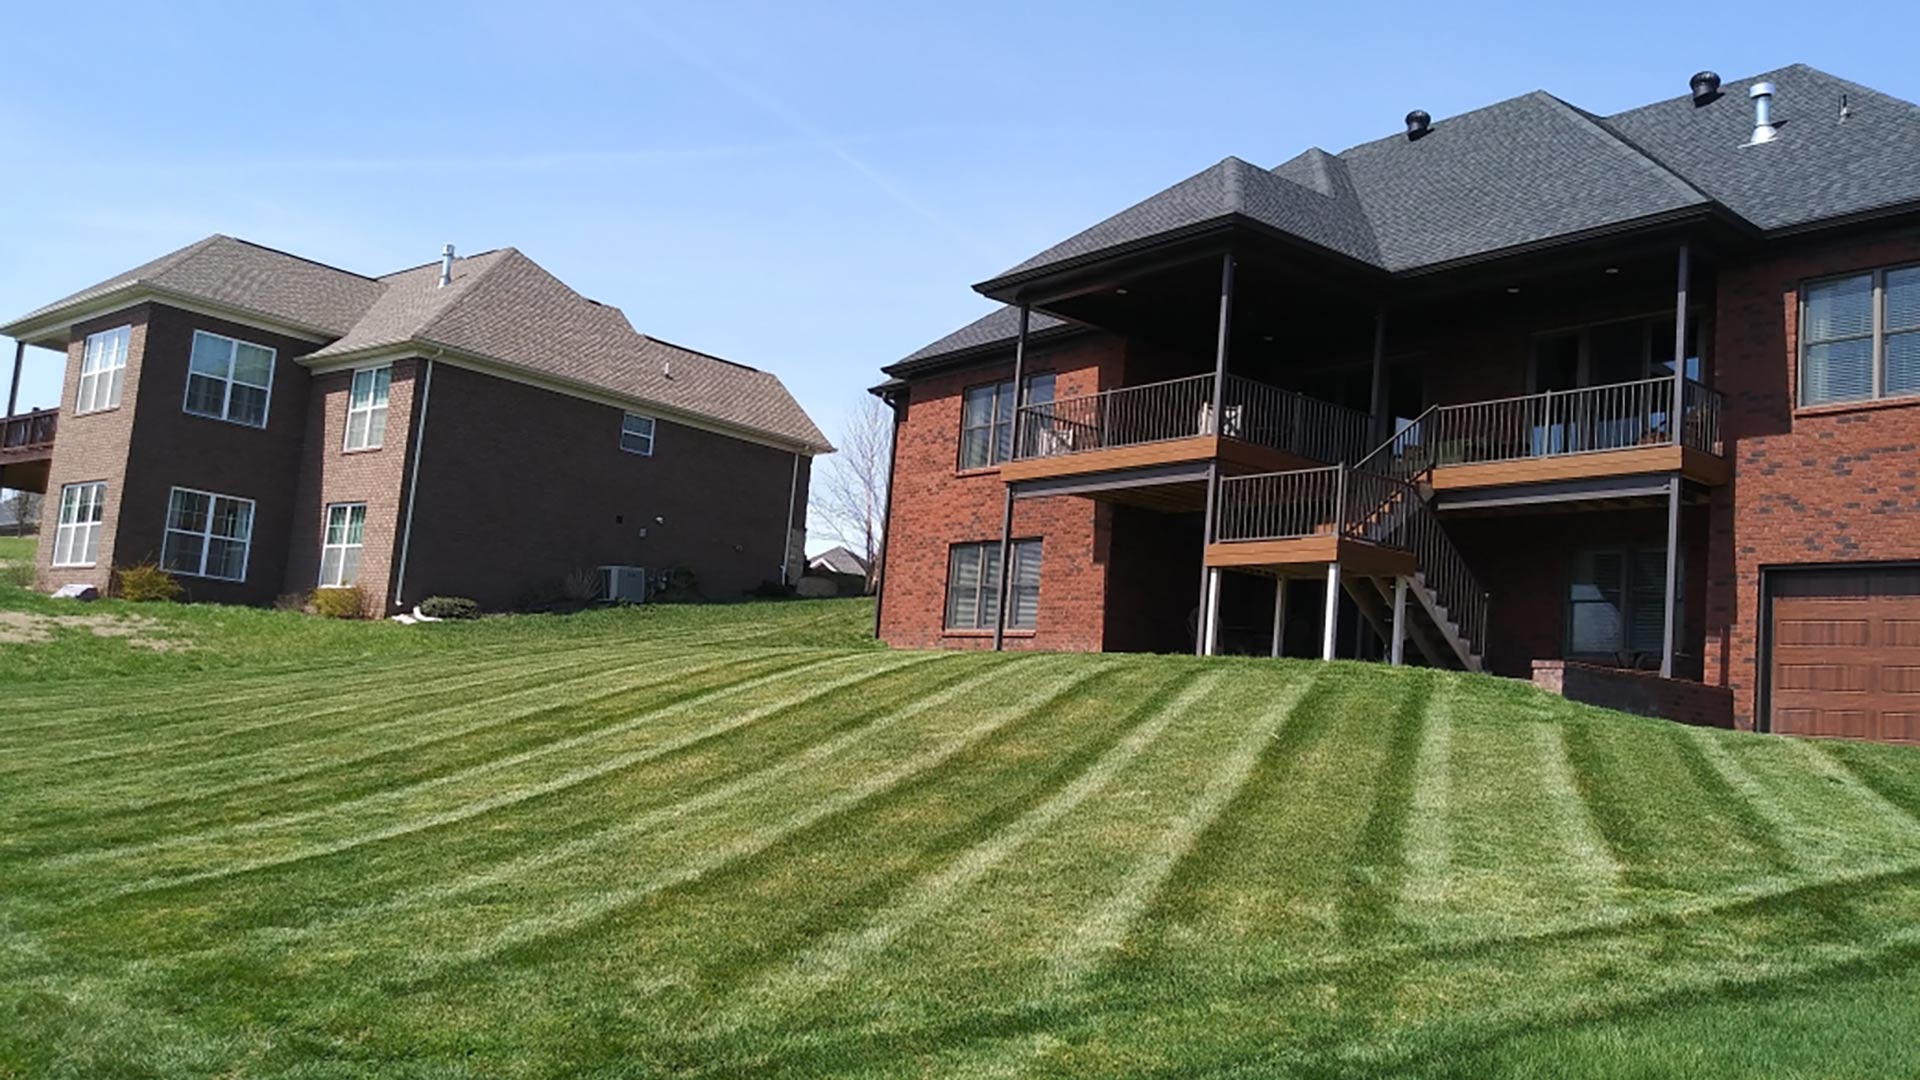 Mowed and maintained lawn in Graymoor-Devondale, KY.